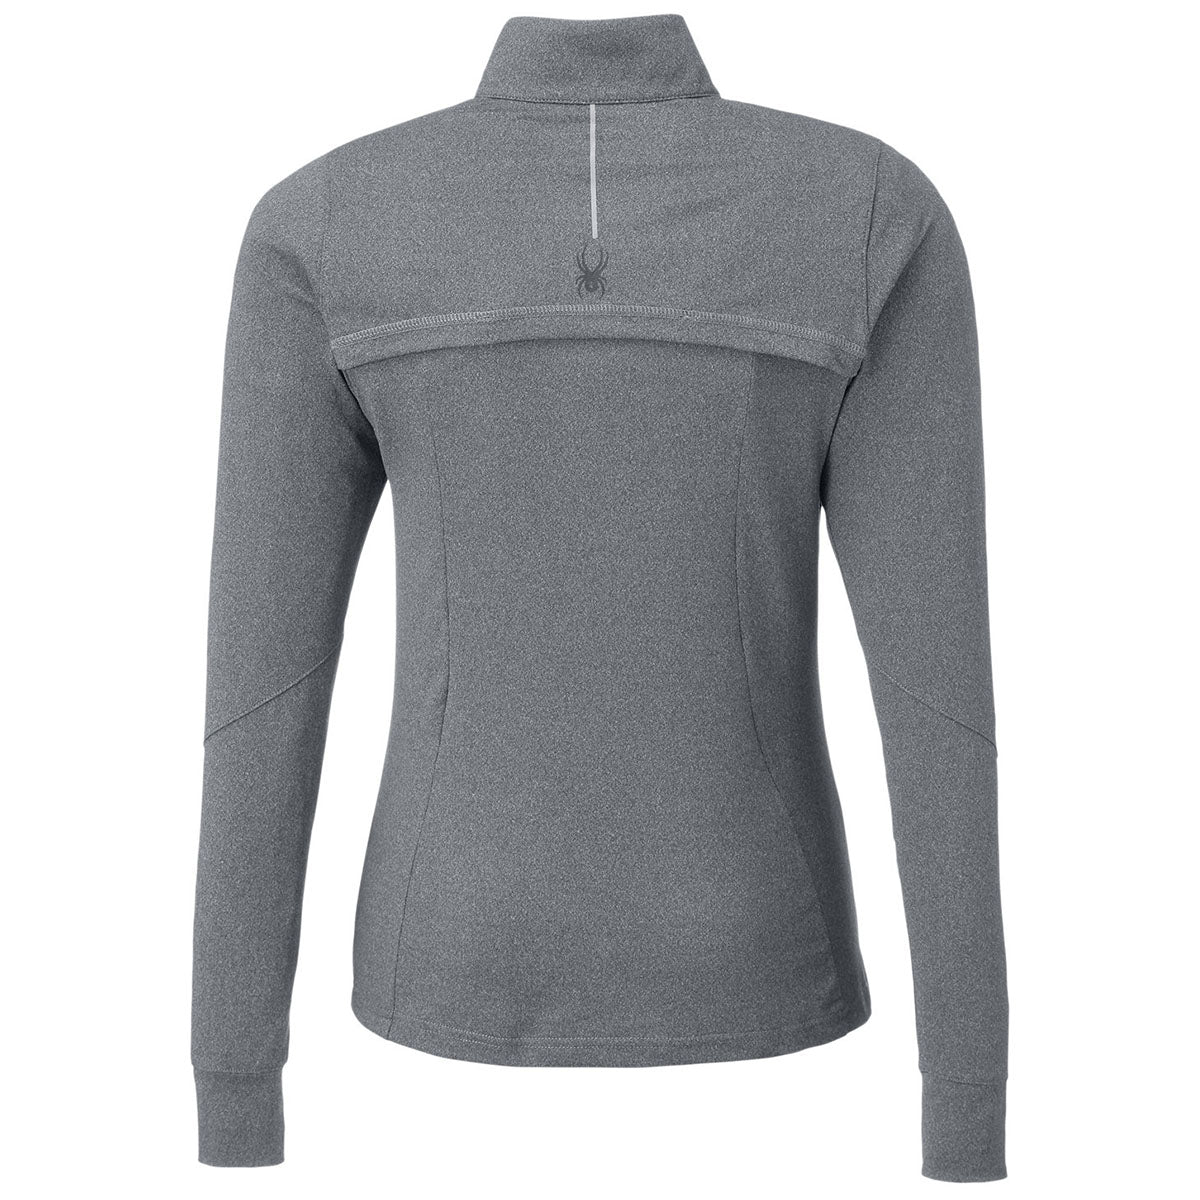 Spyder S17917 Quarter-Zip Pullover with Custom Embroidery